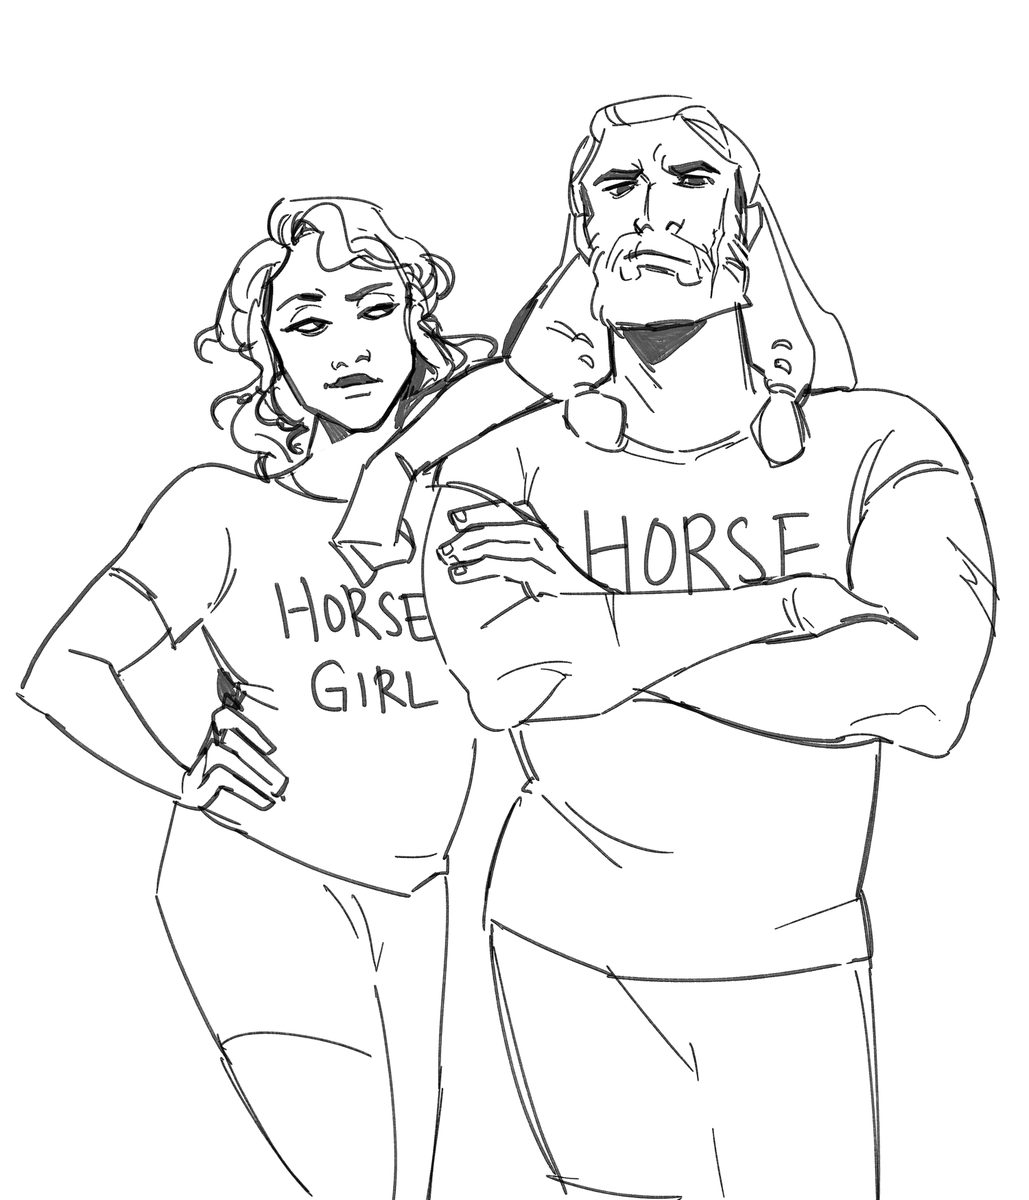 andromache and hector matching t shirts